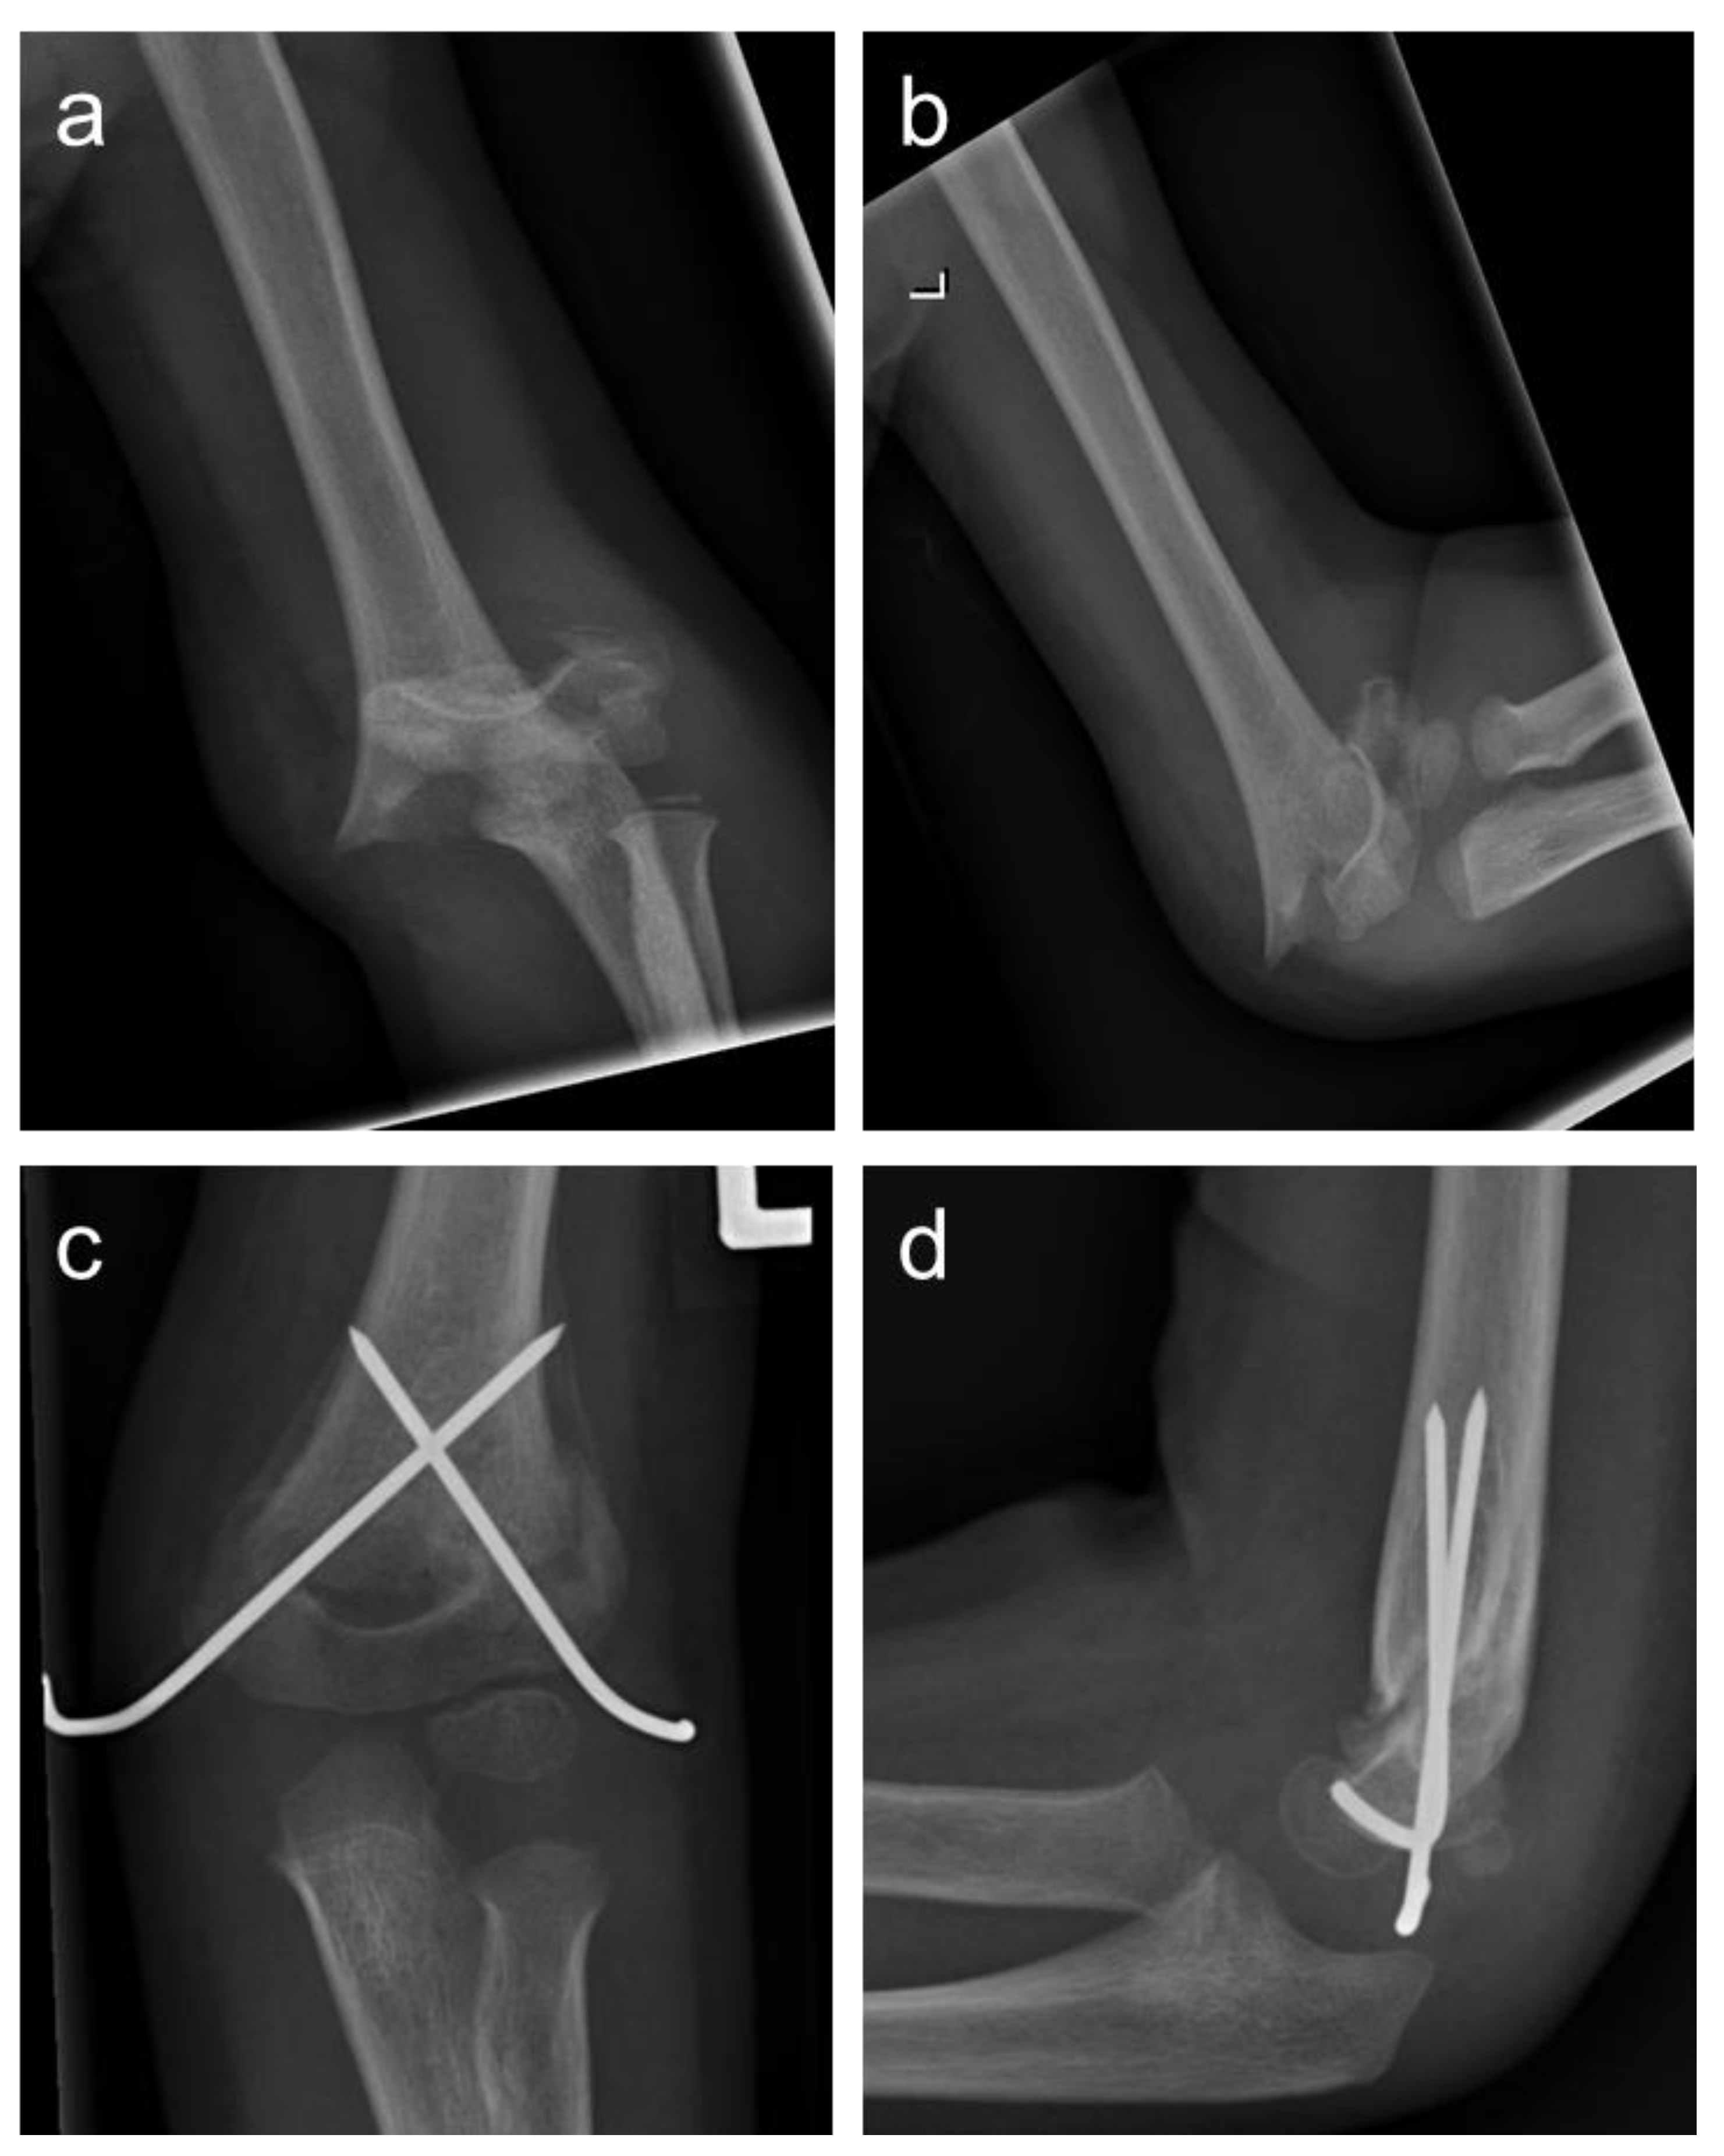 Intramedullary Fixation for Proximal Humeral Fractures